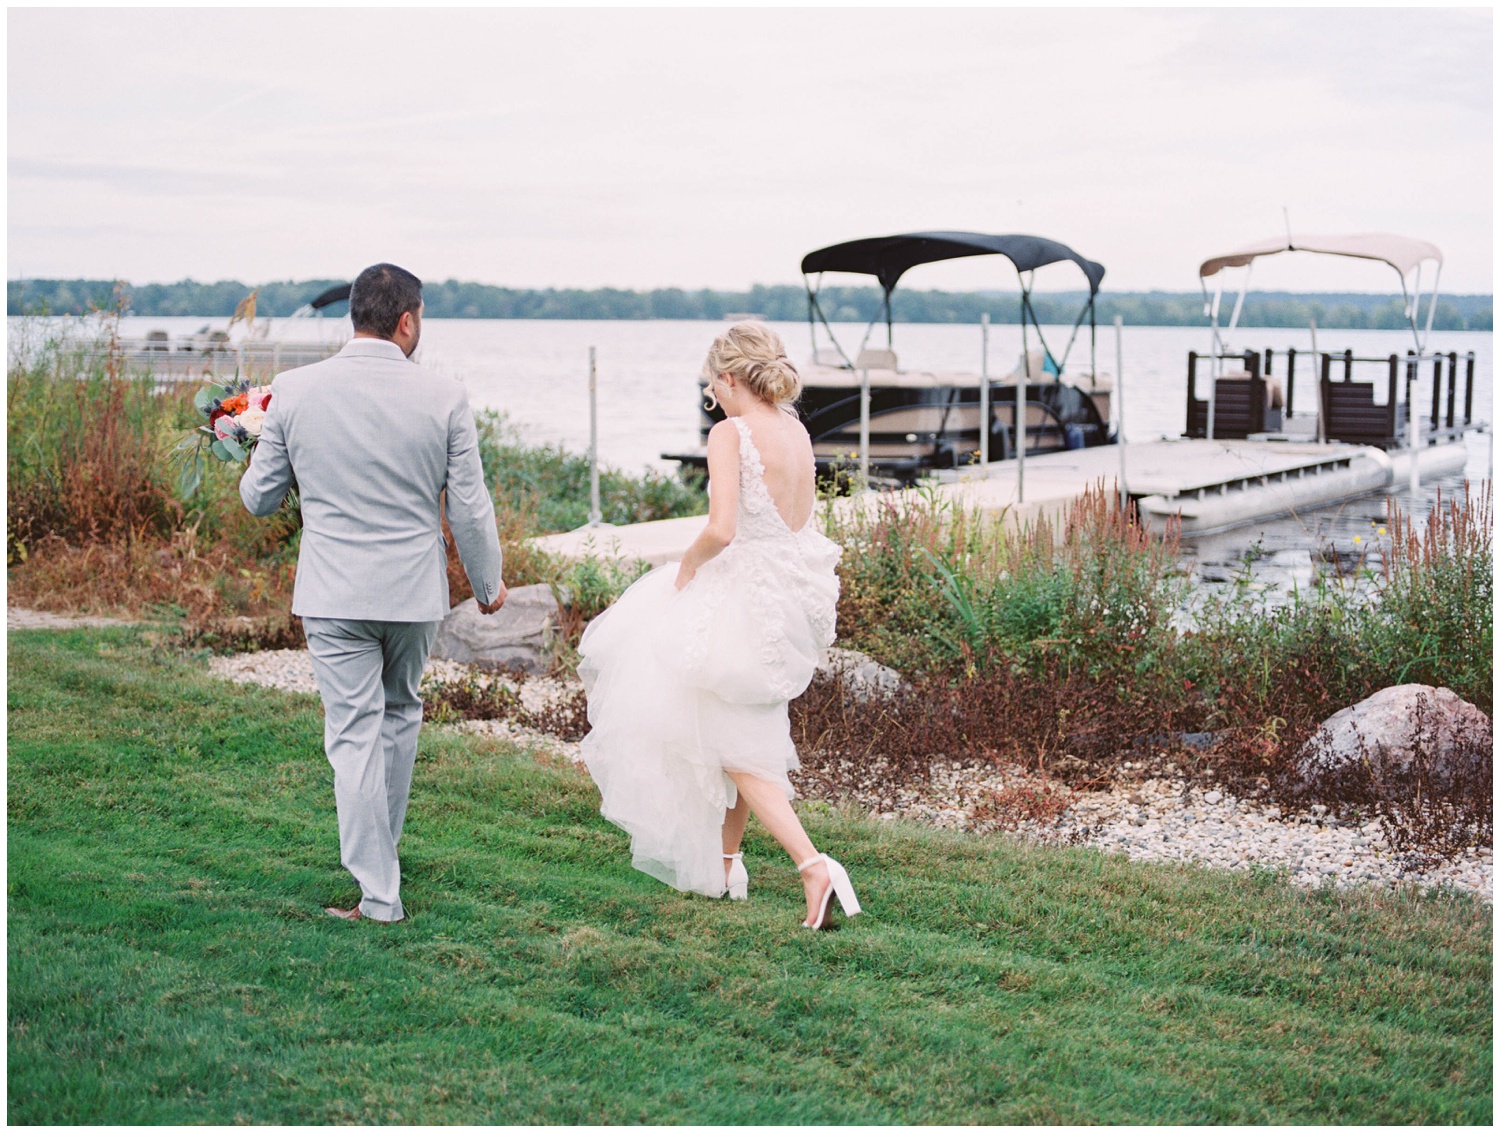 Lauren and Mike walk to the dock to take their bride and groom pictures in Grand Rapids, Michigan Photo by Cynthia Boyle Photography Grand Rapids Wedding Photographer